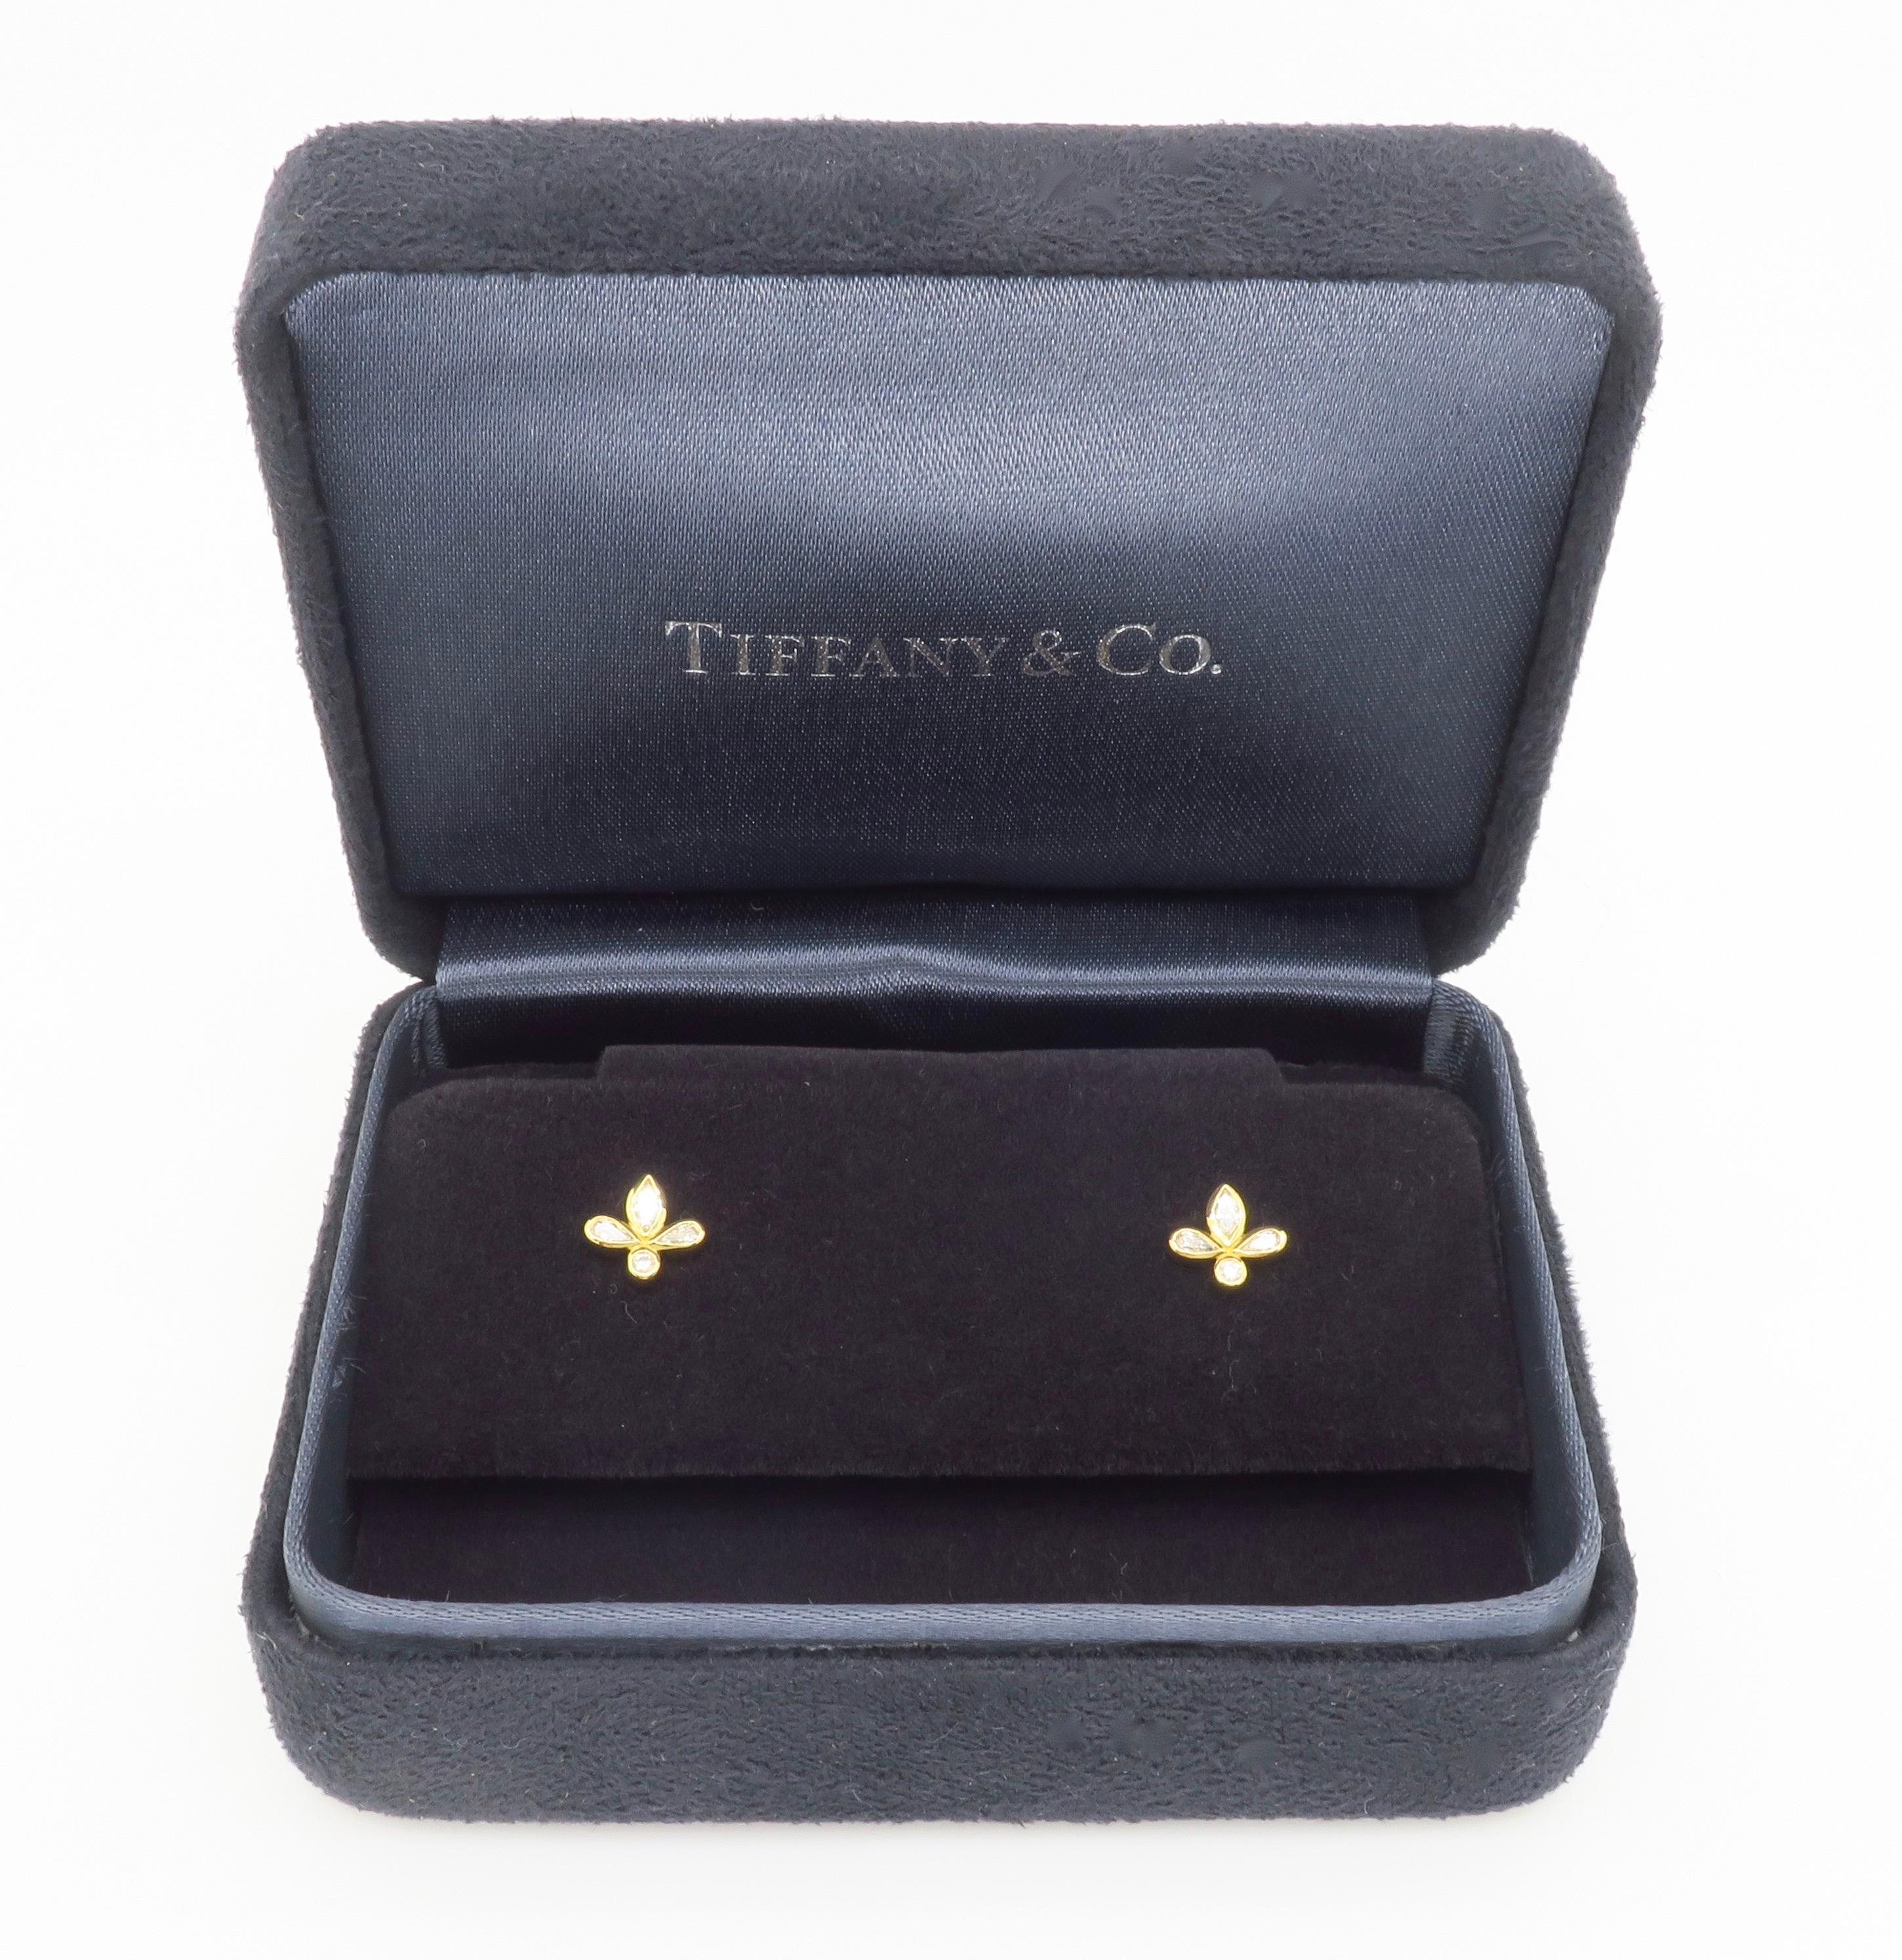 Authentic Tiffany & Co. Fleur de Lis Diamonds stud earrings in 18k, with original box. 

Diamond Carat Weight: .19CTW
Diamond Cut: Marquise, Pear and Round Brilliant
Color: E-F
Clarity: VS1-VS2
Metal: 18k Yellow Gold
Marked/Tested: Stamped “T & CO